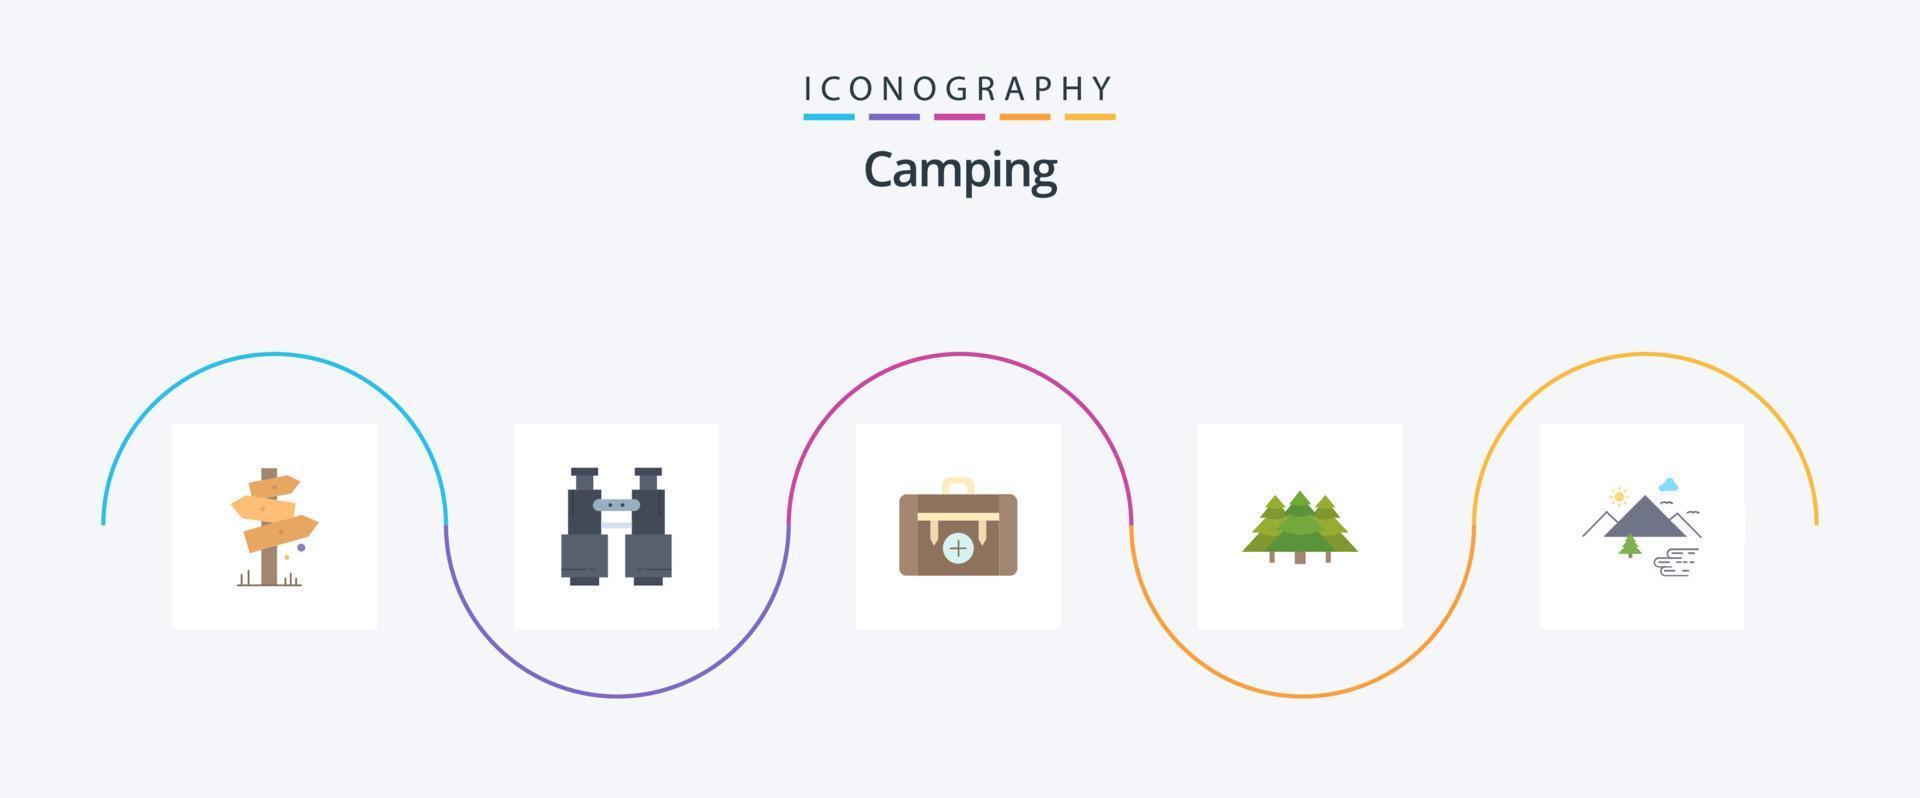 Camping Flat 5 Icon Pack Including camping. luggage. explore. hiking. camping vector